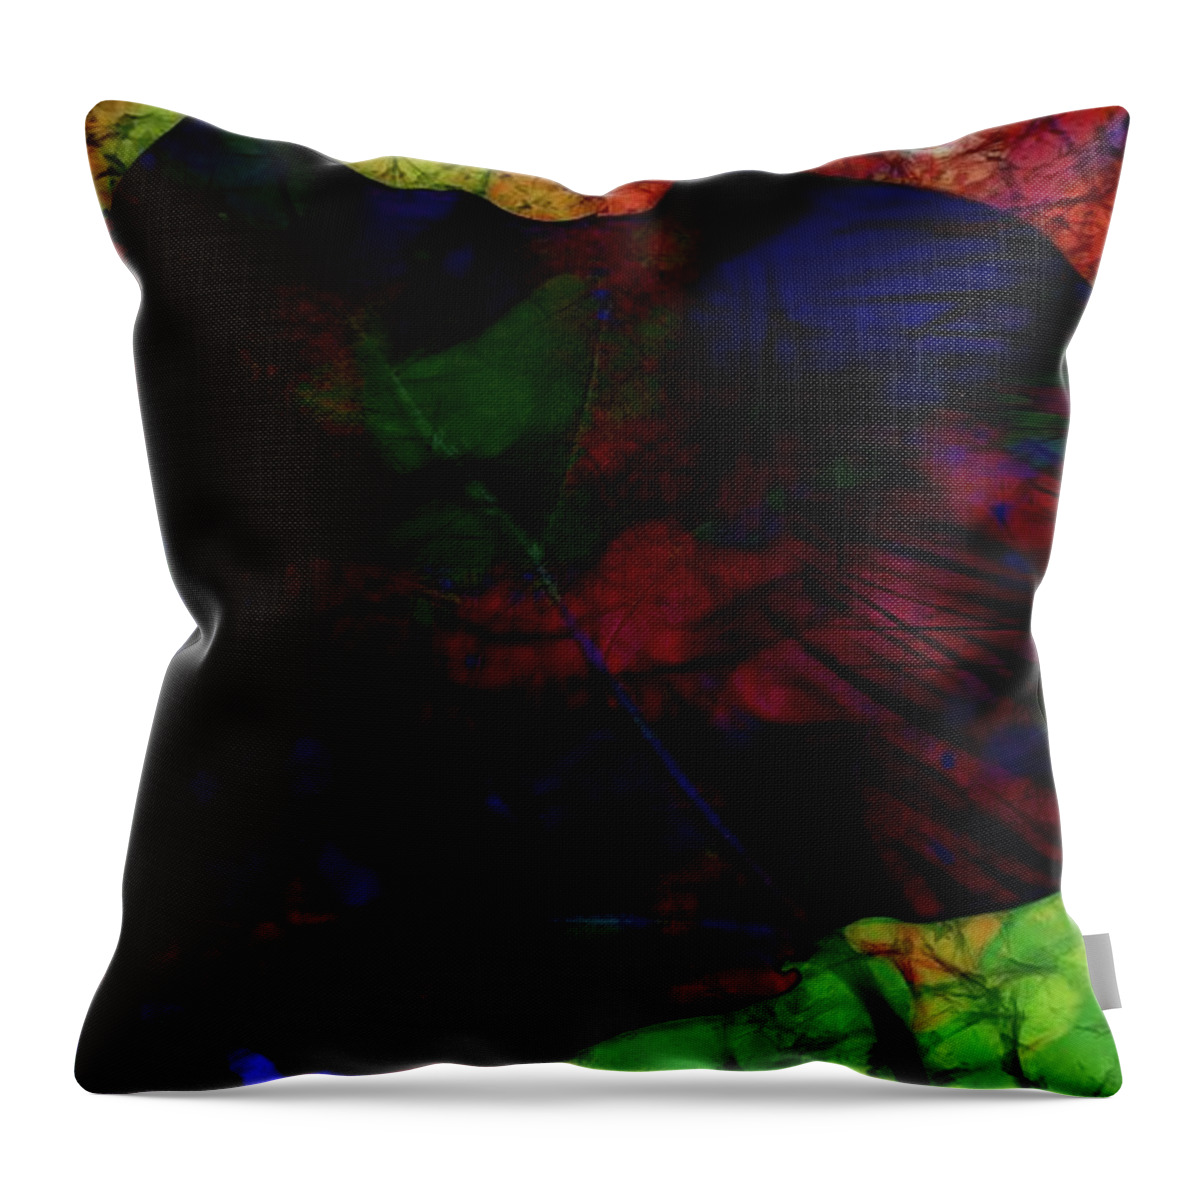 Leaf Throw Pillow featuring the photograph Abstract Leaf 11 by Kristalin Davis